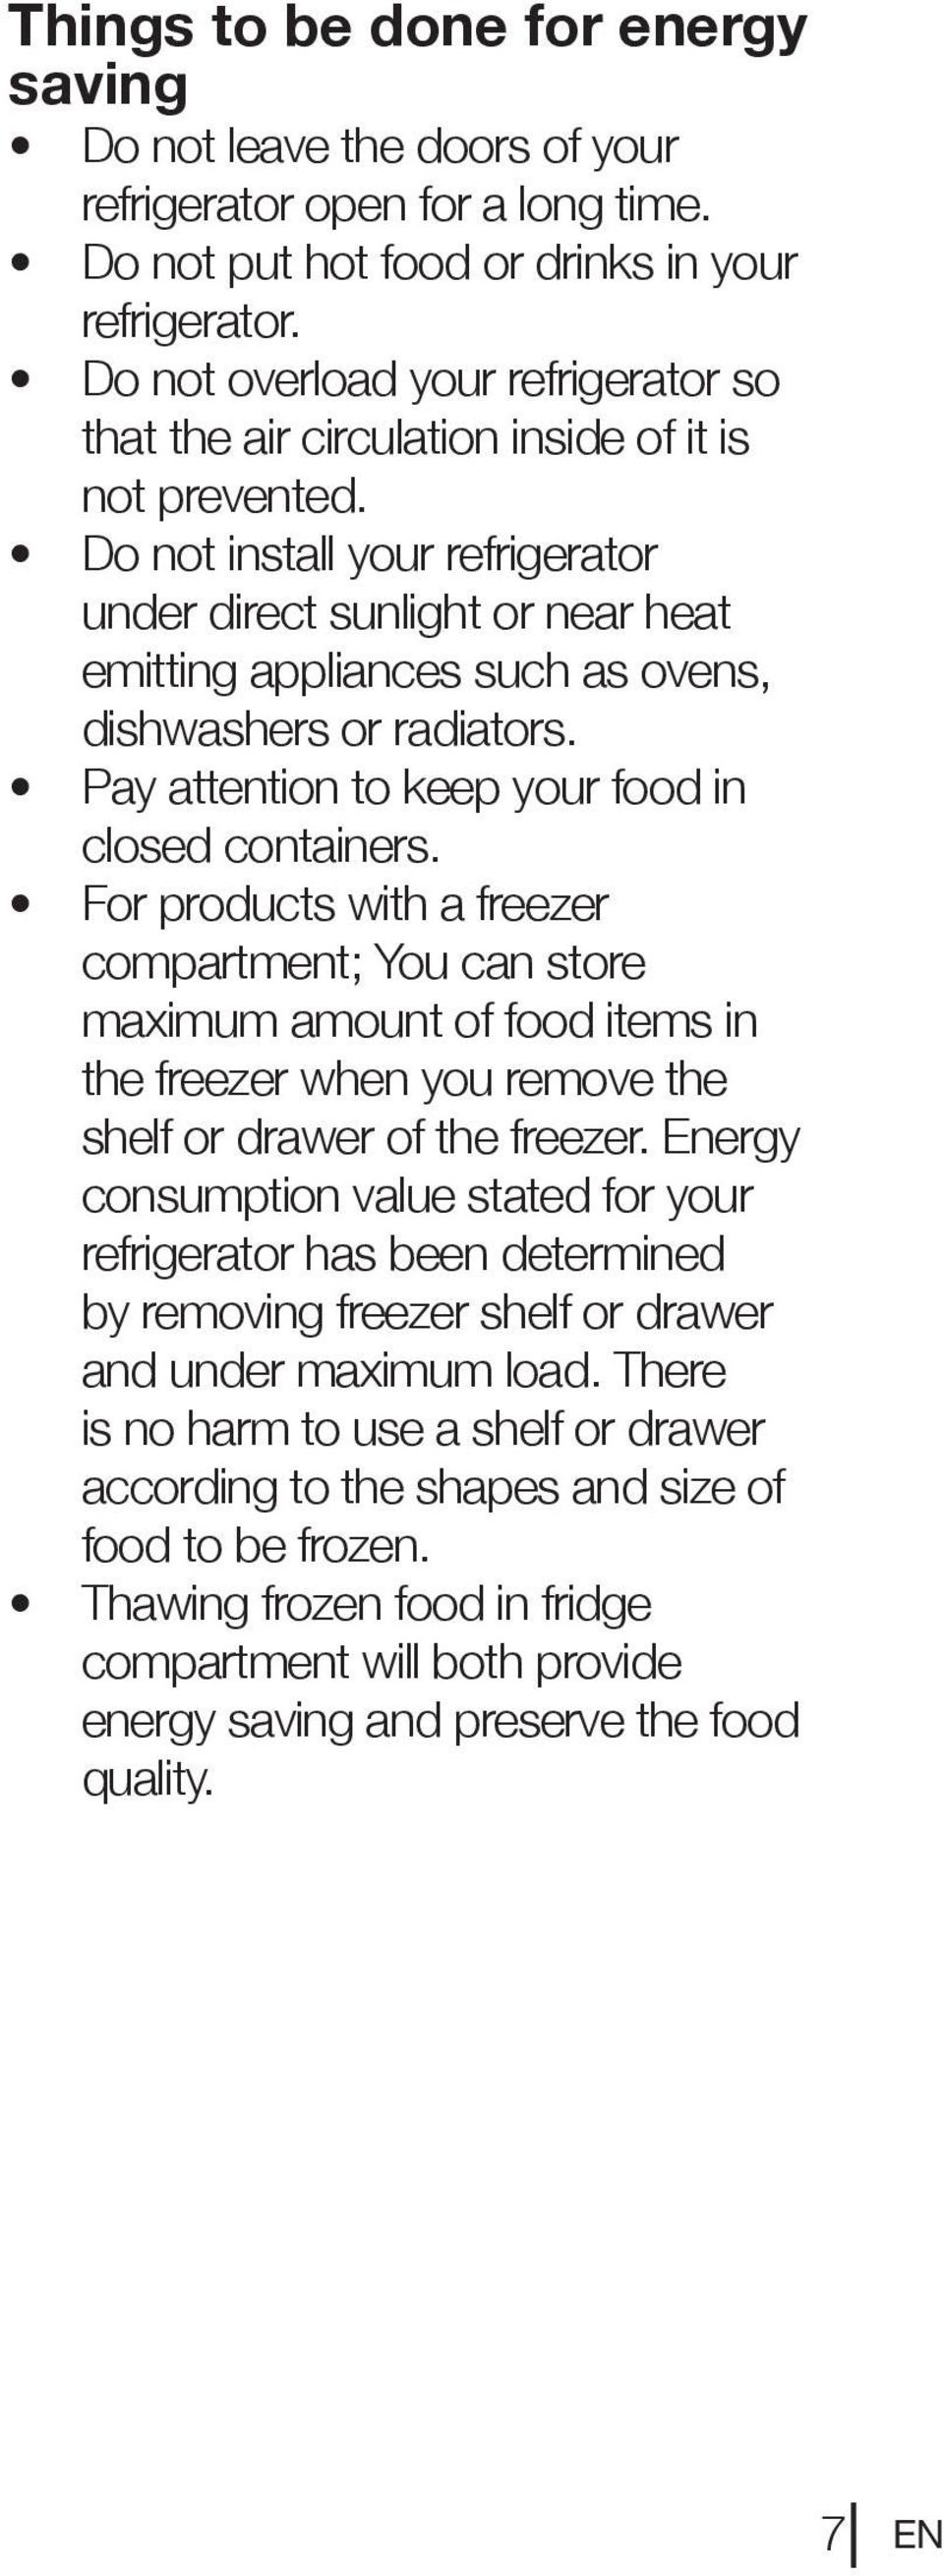 Do not install your refrigerator under direct sunlight or near heat emitting appliances such as ovens, dishwashers or radiators. Pay attention to keep your food in closed containers.